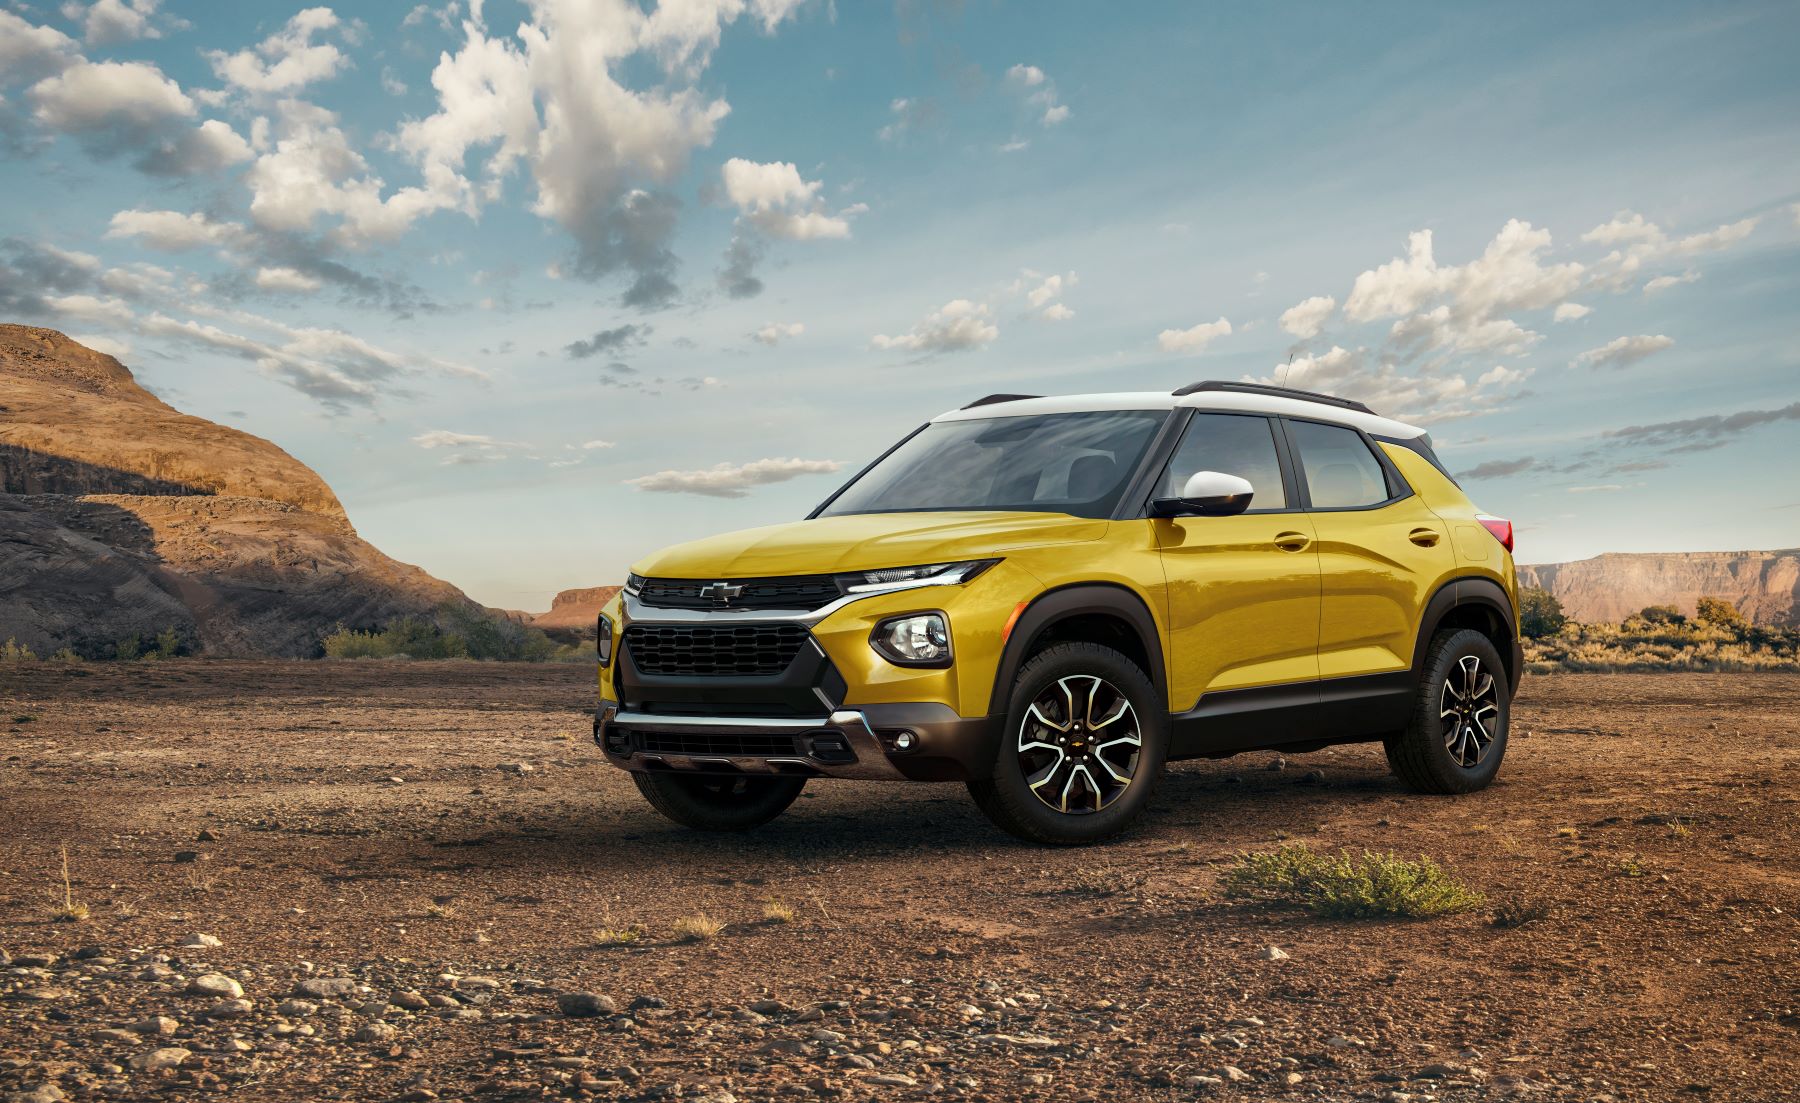 A yellow 2023 Chevy Trailblazer subcompact SUV model parked on a desert dirt plain